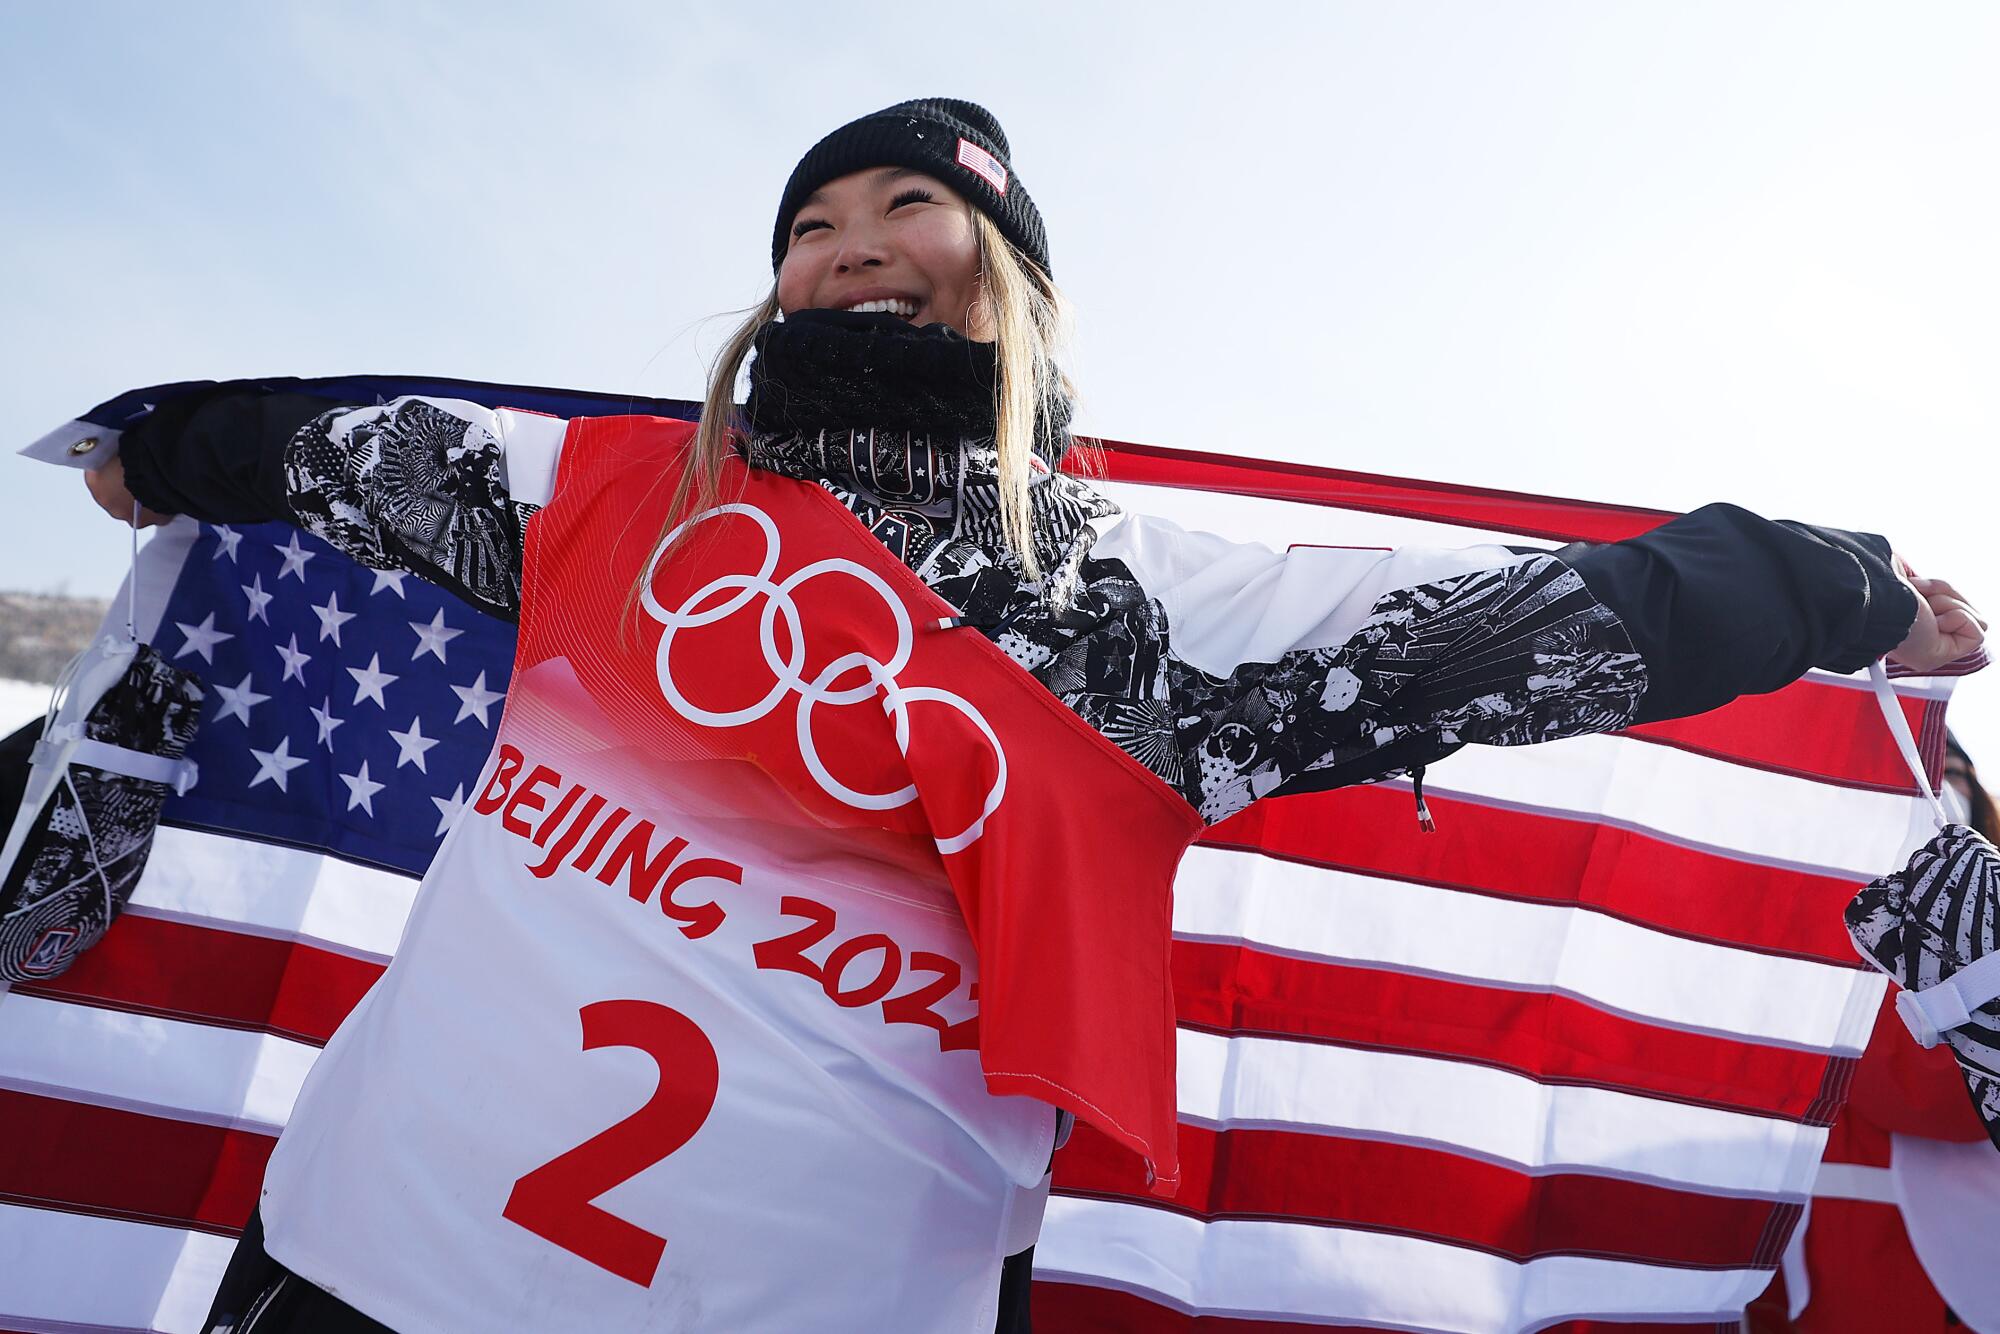 Chloe Kim celebrates with an American flag after winning the gold medal at the Olympics.